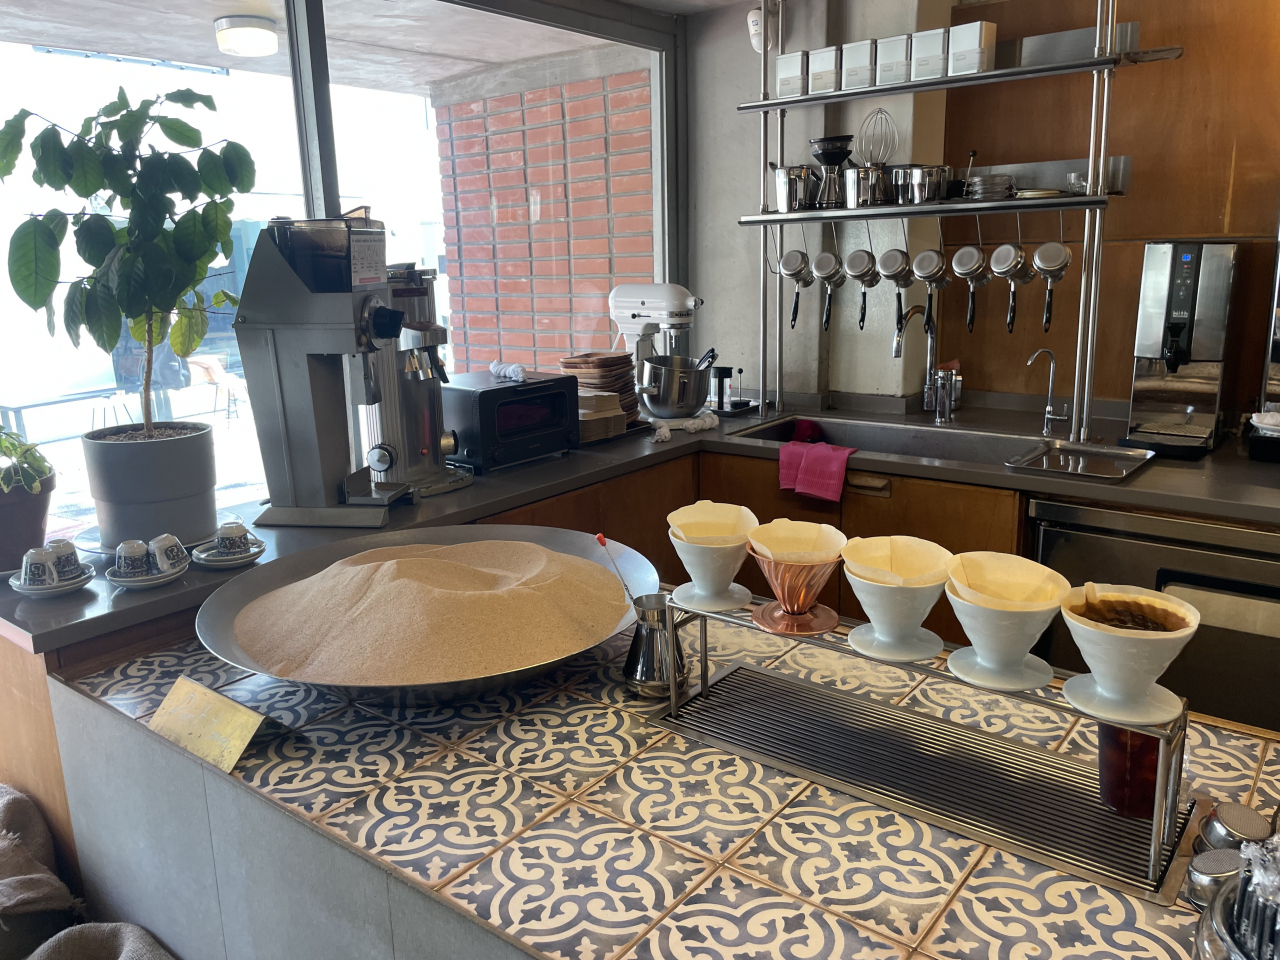 Hot sand on a pan (left) and a coffee brewing stand (right) at Nontanto Coffee. (Kim Da-sol/The Korea Herald)